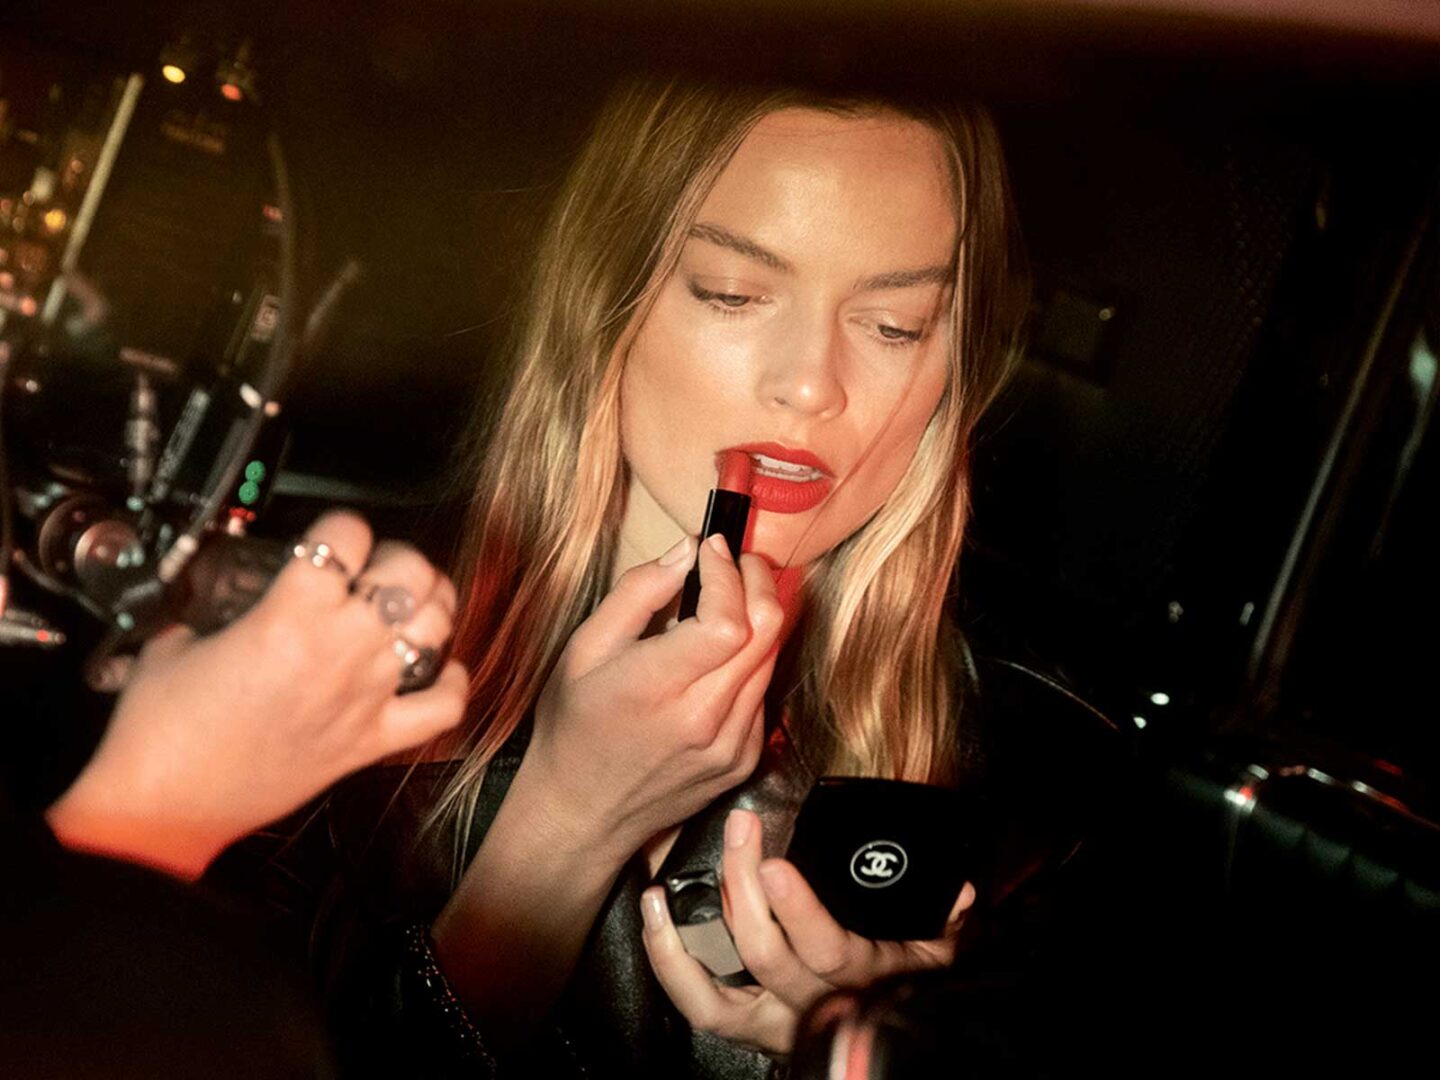 Chanel Beauty presents its new lipsticks for evening wear